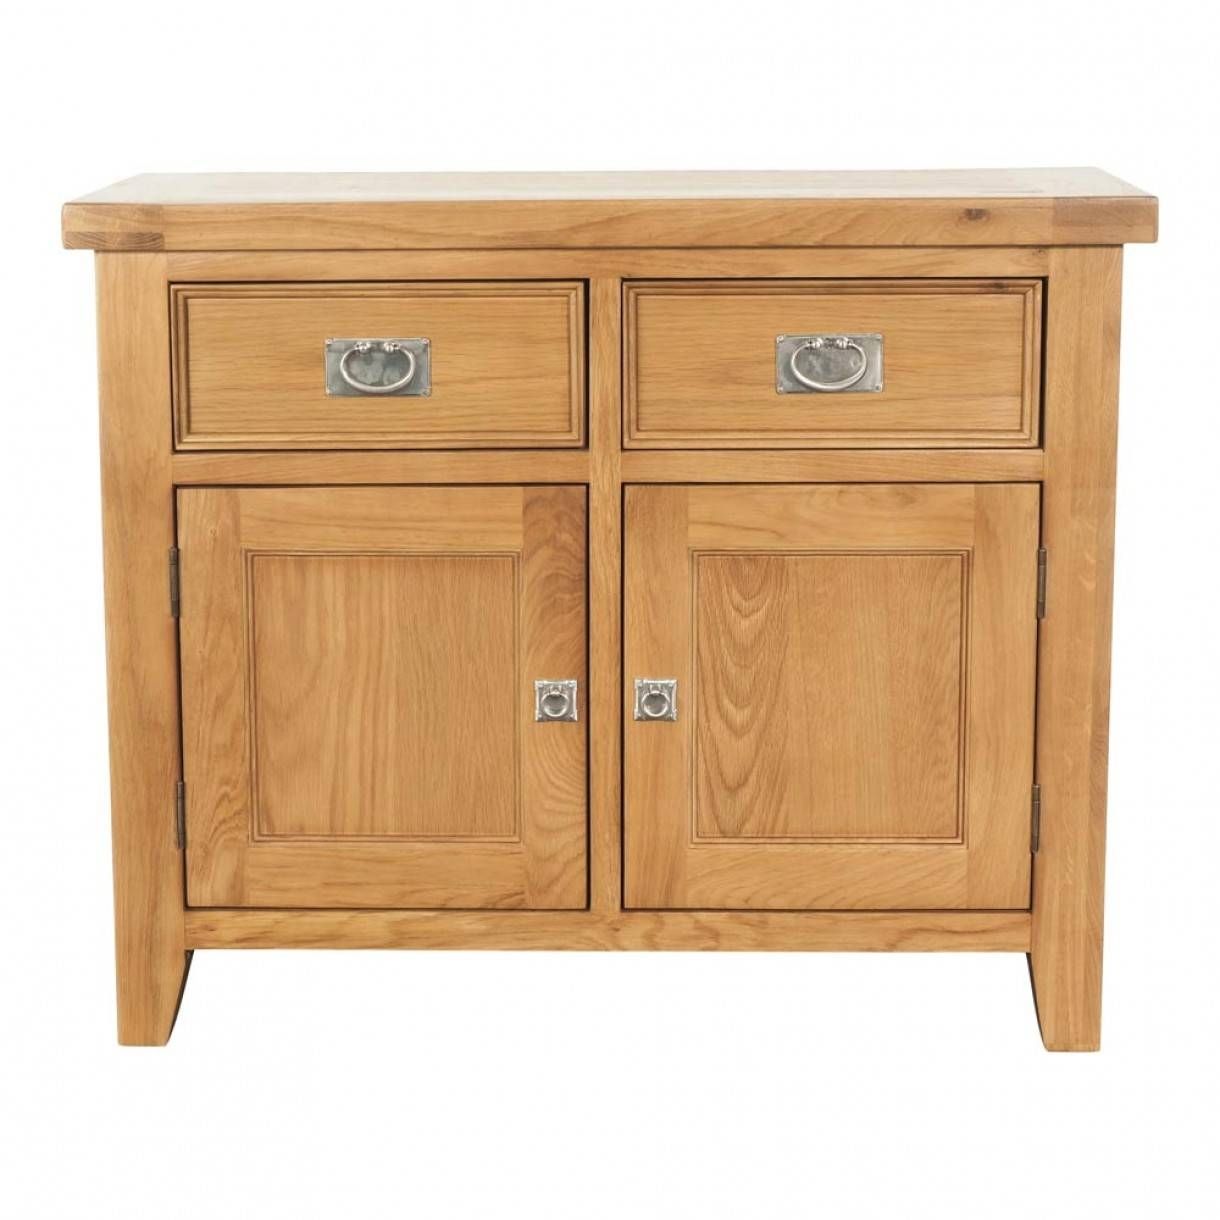 Buy Buffets And Sideboards Online | Dining | Early Settler Furniture Pertaining To Buffets And Sideboards (View 12 of 15)